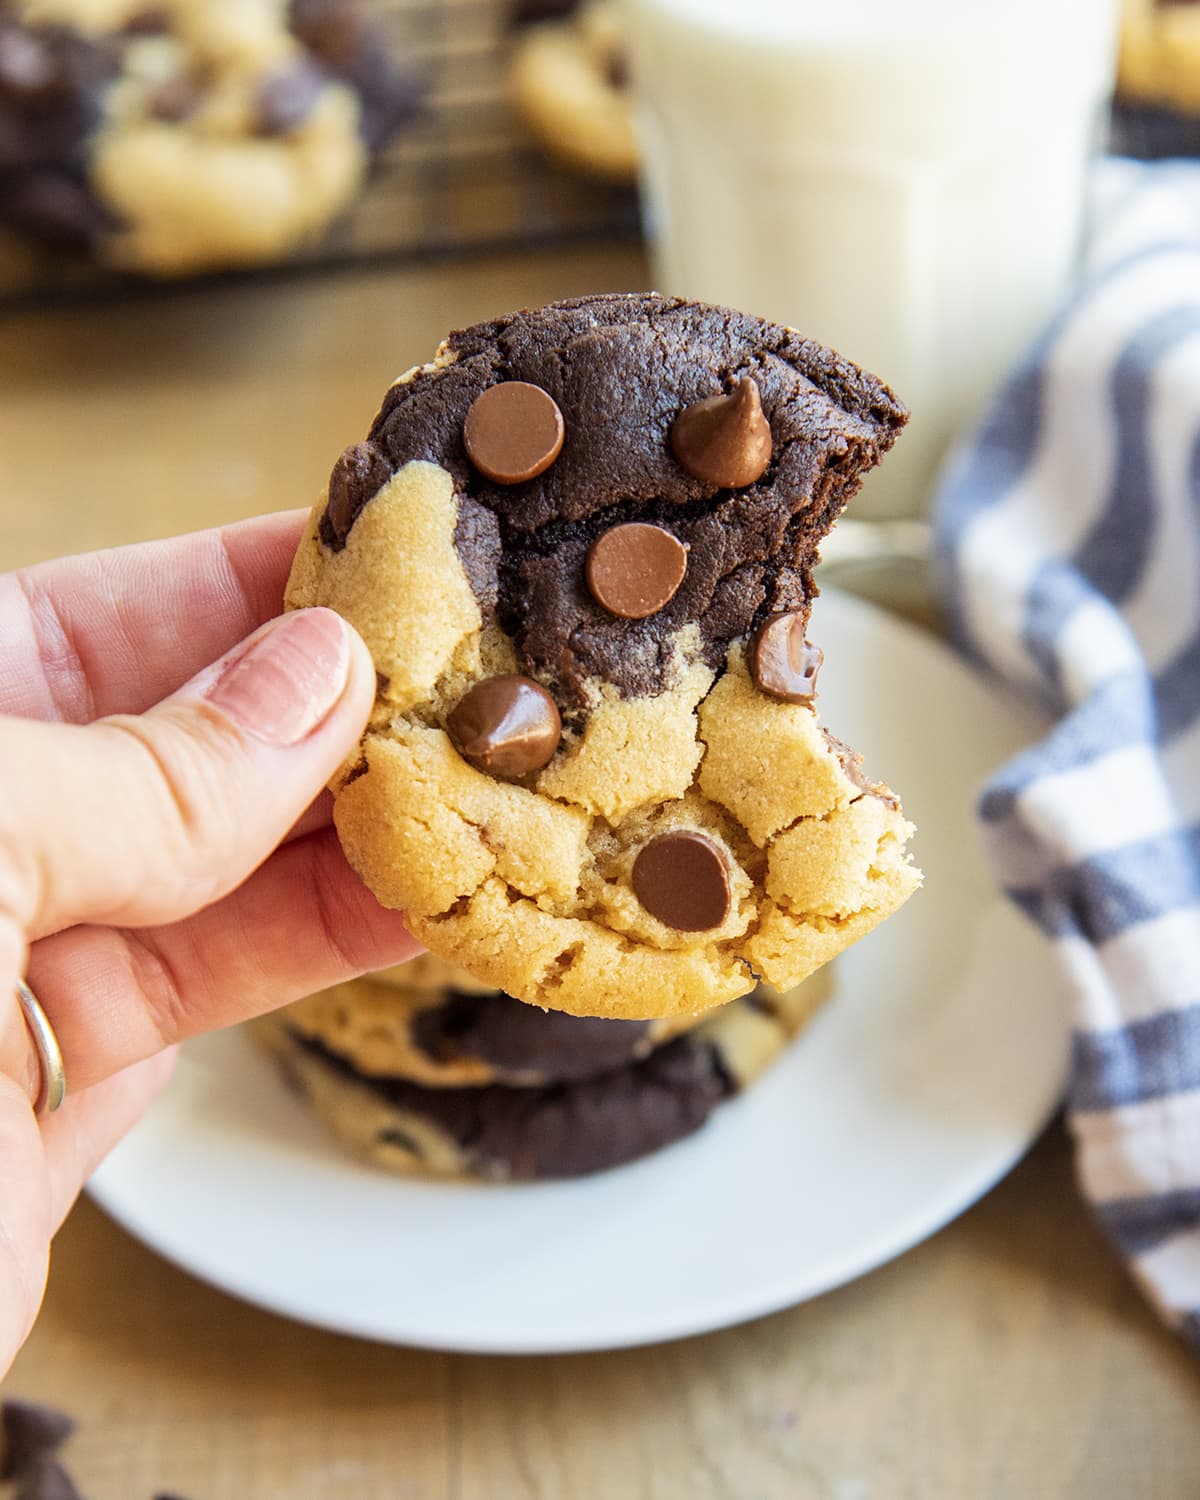 A hand holding a chocolate peanut butter marbled chocolate chip cookie with a bite out of it.